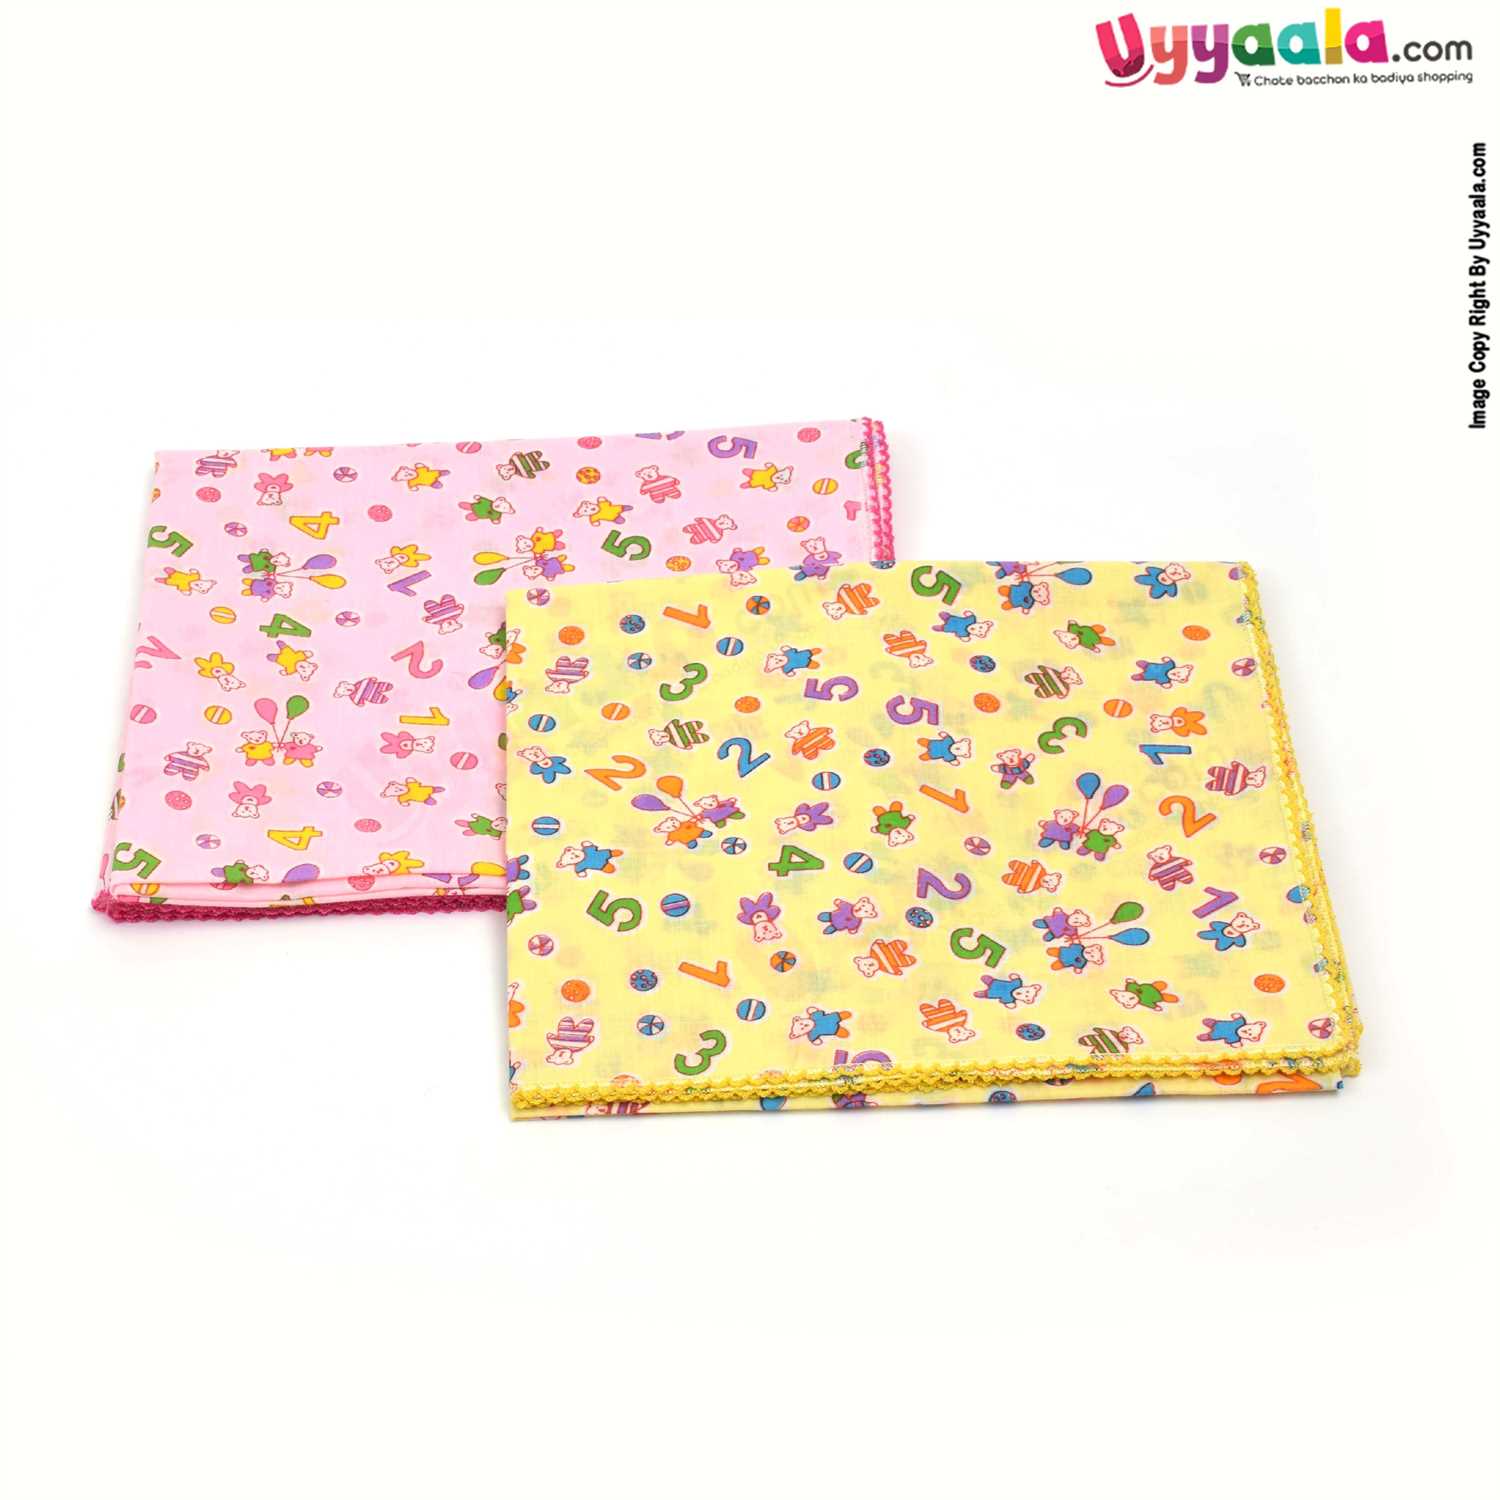 SNUG UP Babies Cotton Wrapper with Teddy Bear & Numbers Print Pack of 2 0+m Age, Size (109*99cm)-Yellow & Pink